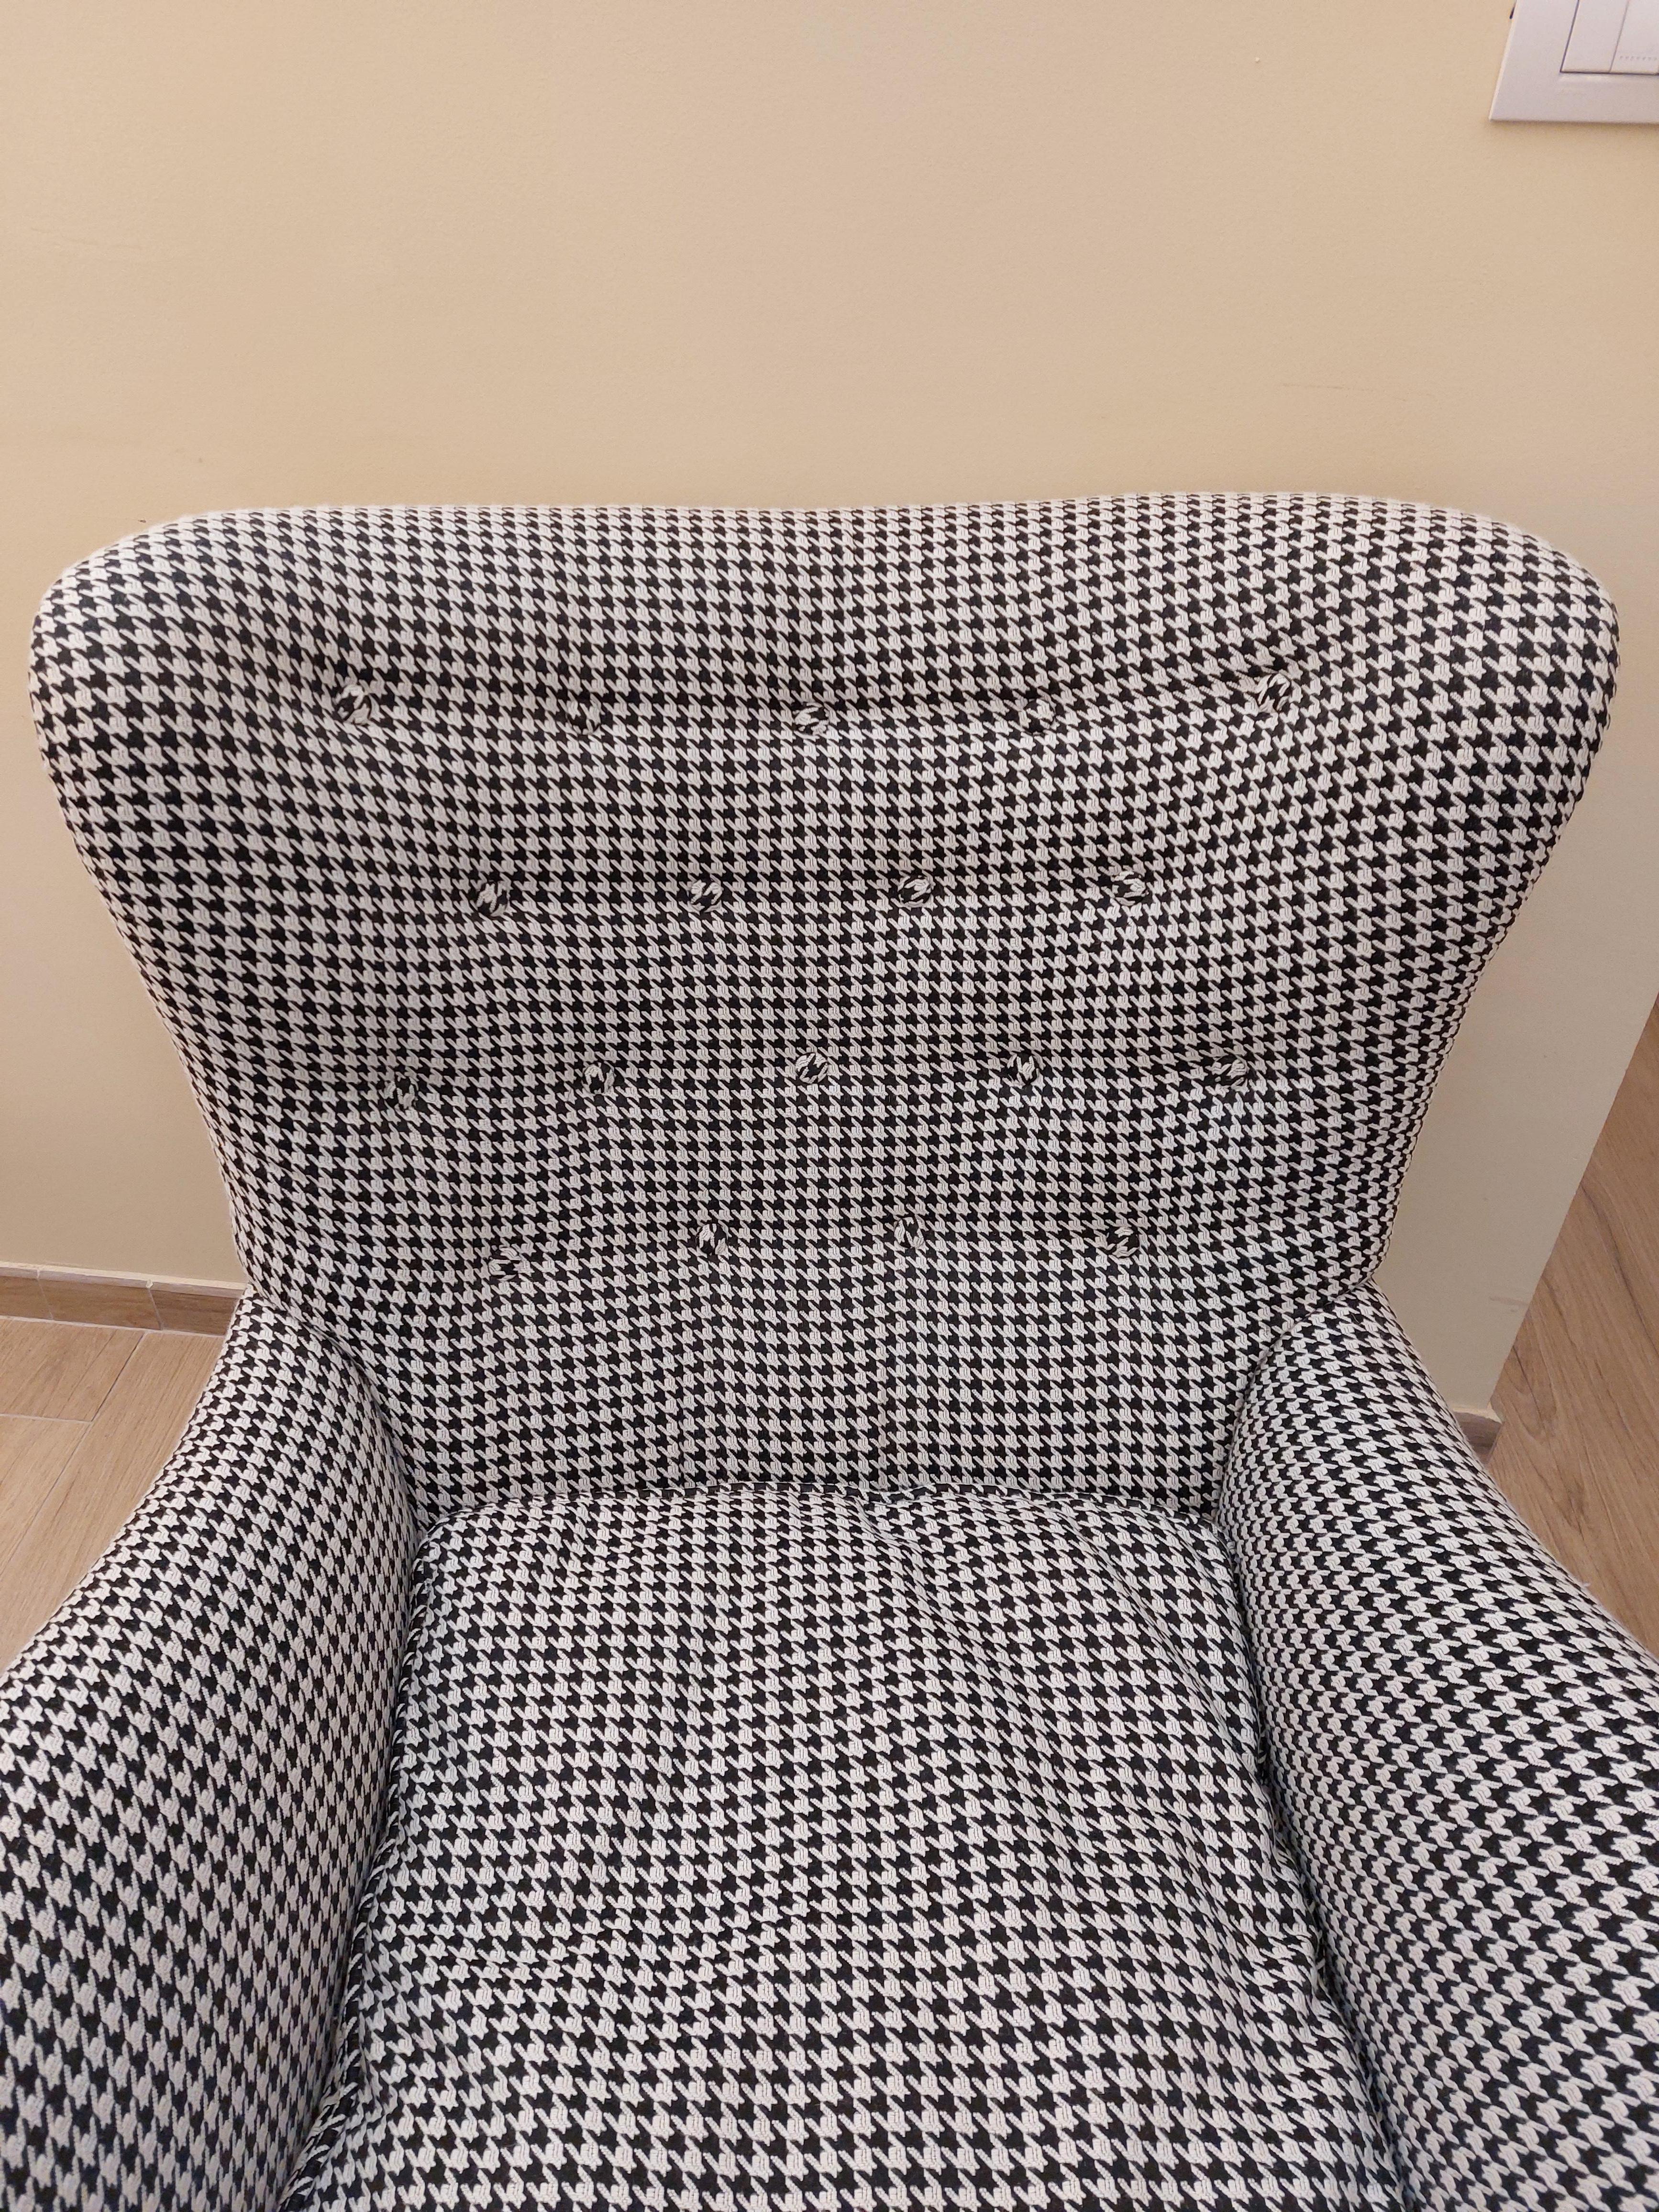 Recently restored 1940s single armchair with new houndstooth upholstery.

Very wide and comfortable seat.

We have chosen a design fabric for an armchair that fits easily into any environment, giving it a unique and distinctive touch.